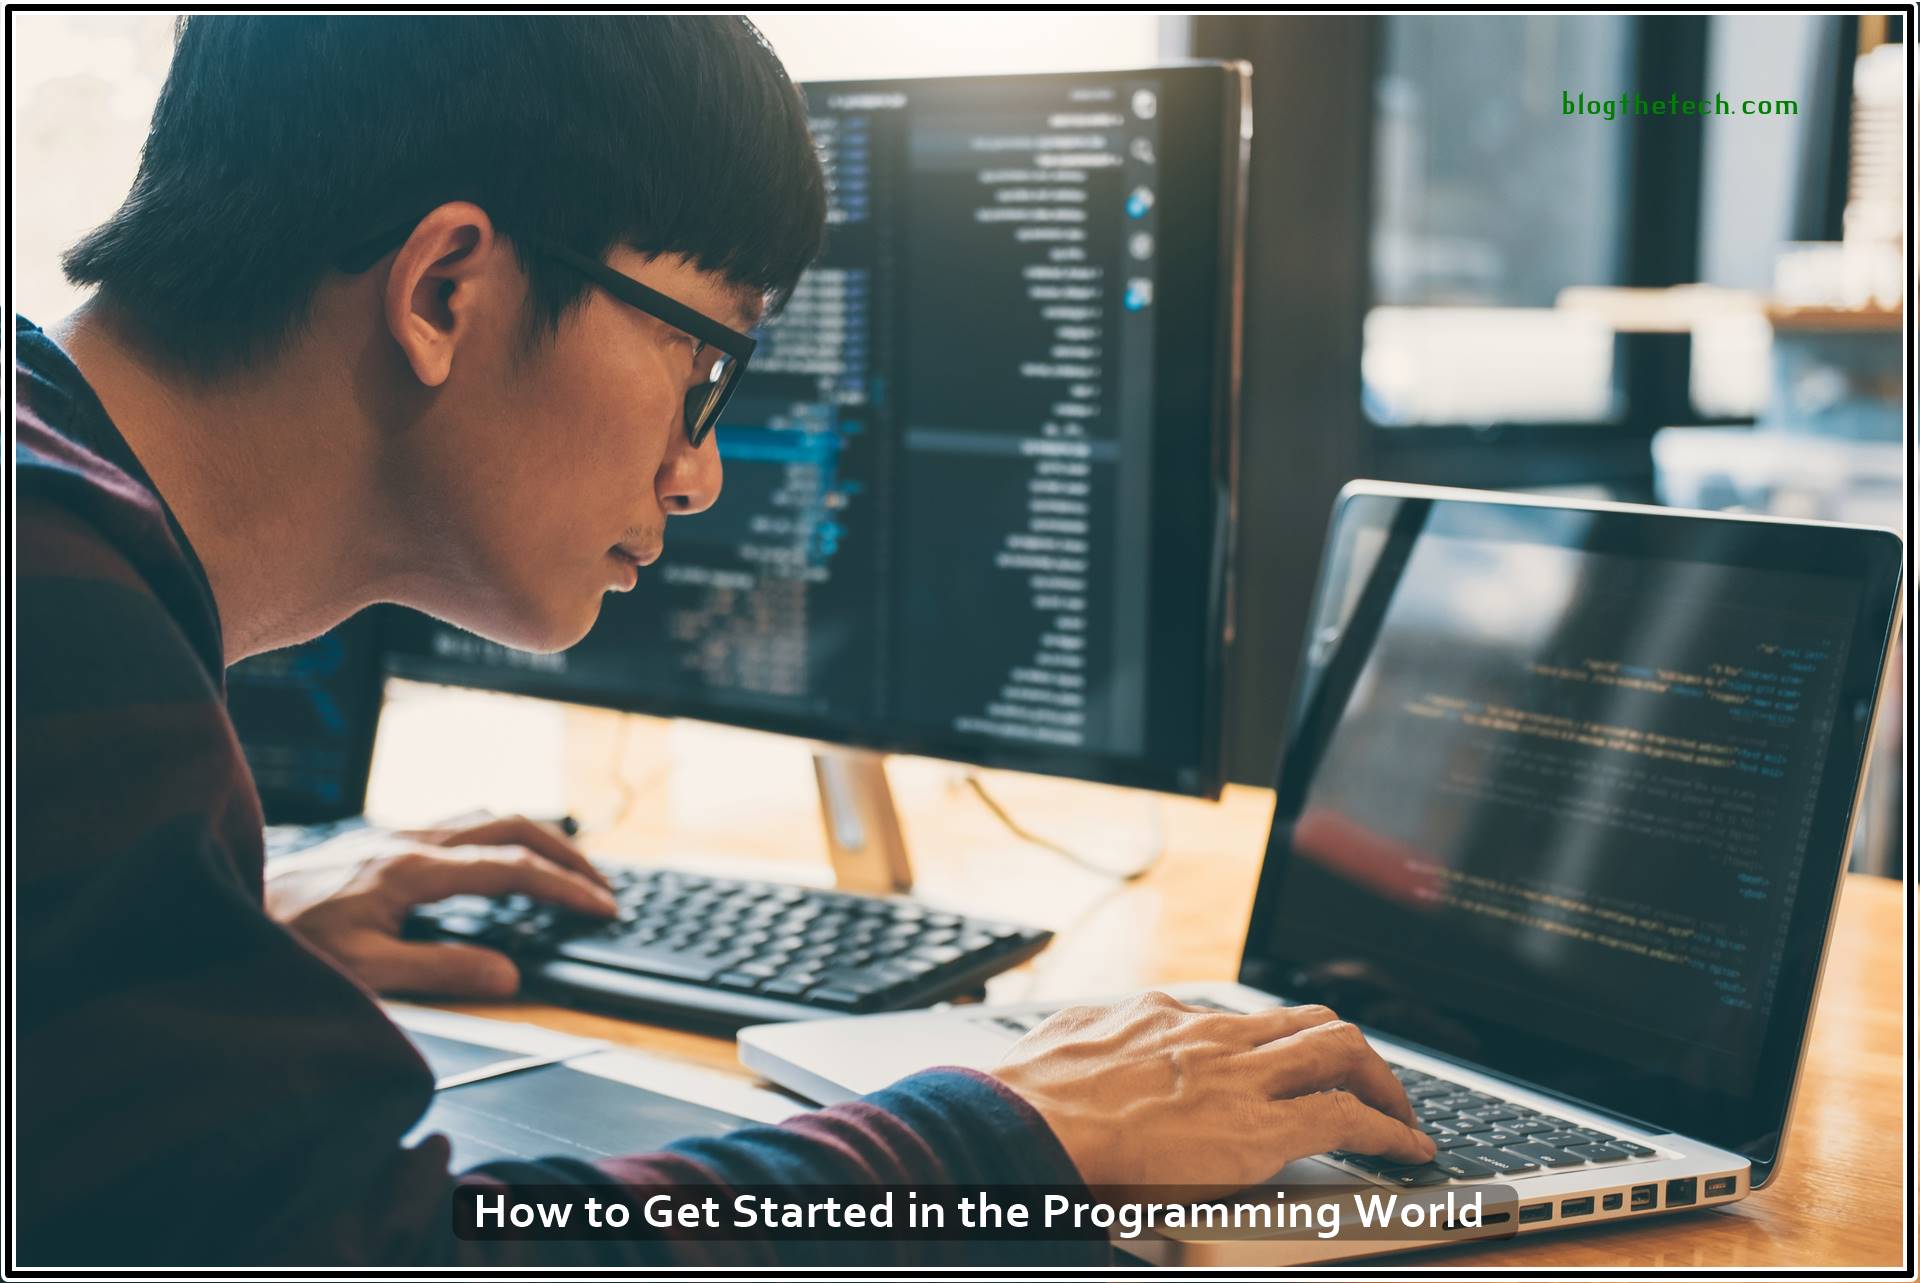 How to Get Started in the Programming World